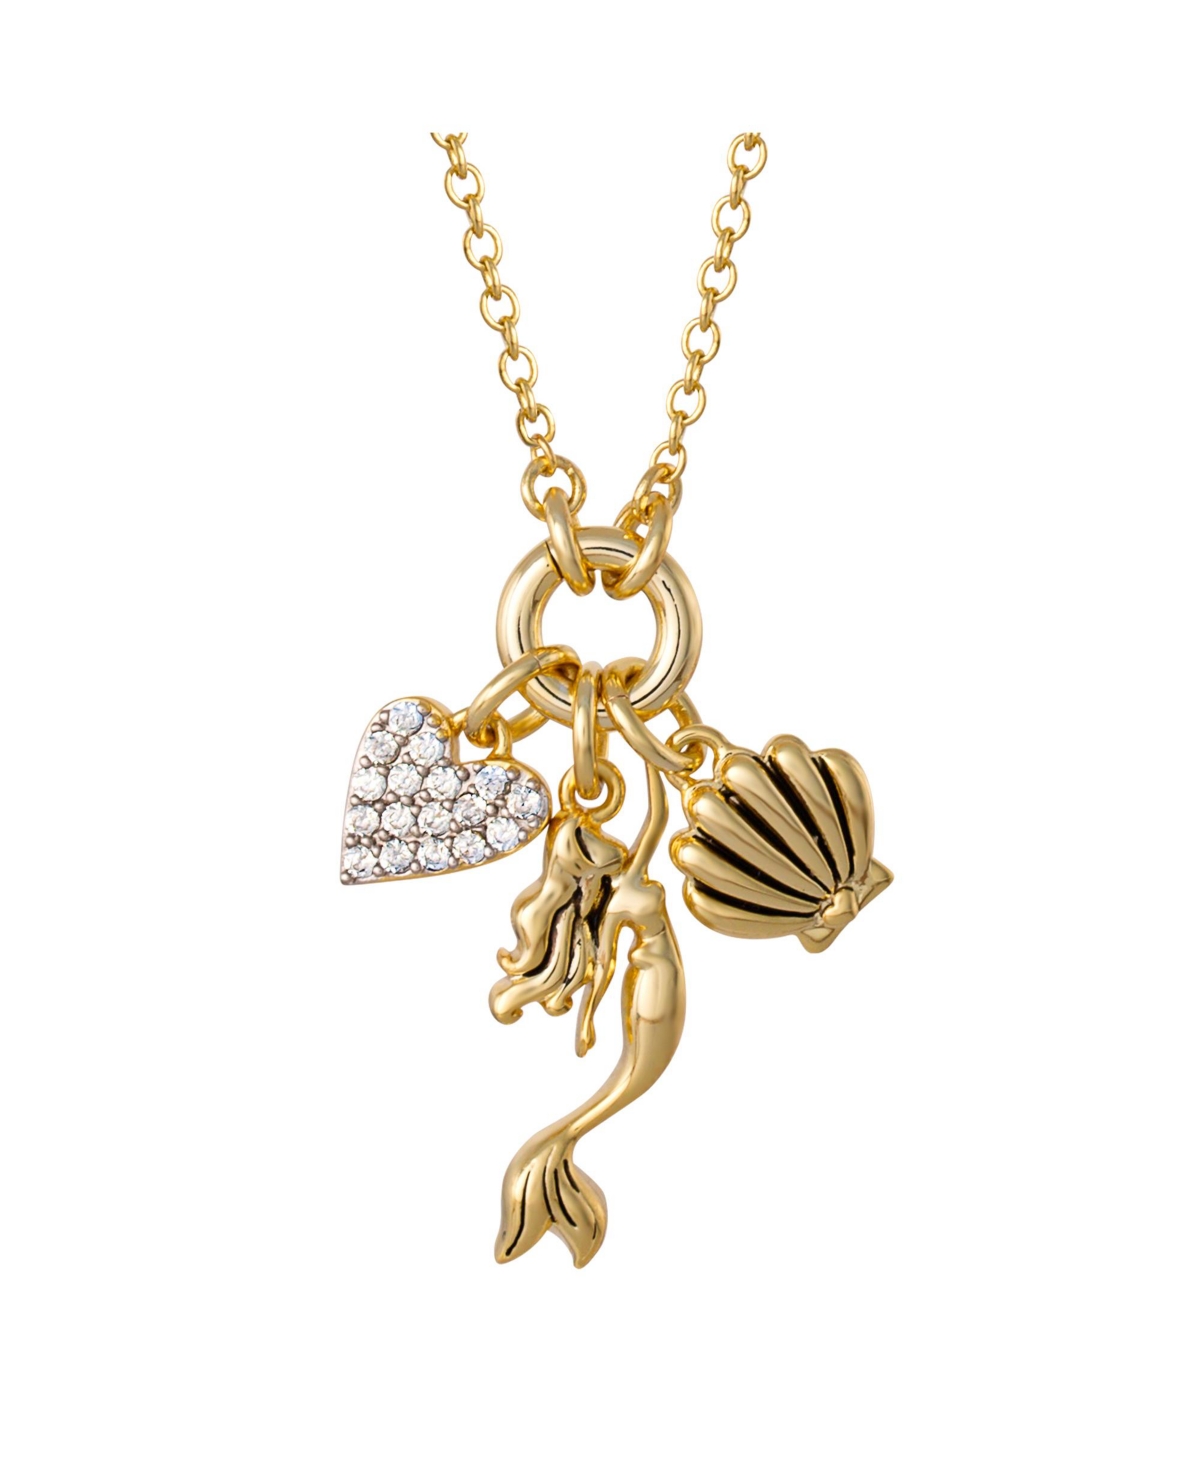 Princess Cinderella Yellow Gold Plated 3D Cubic Zirconia Charm Necklace, 18'' - Gold tone